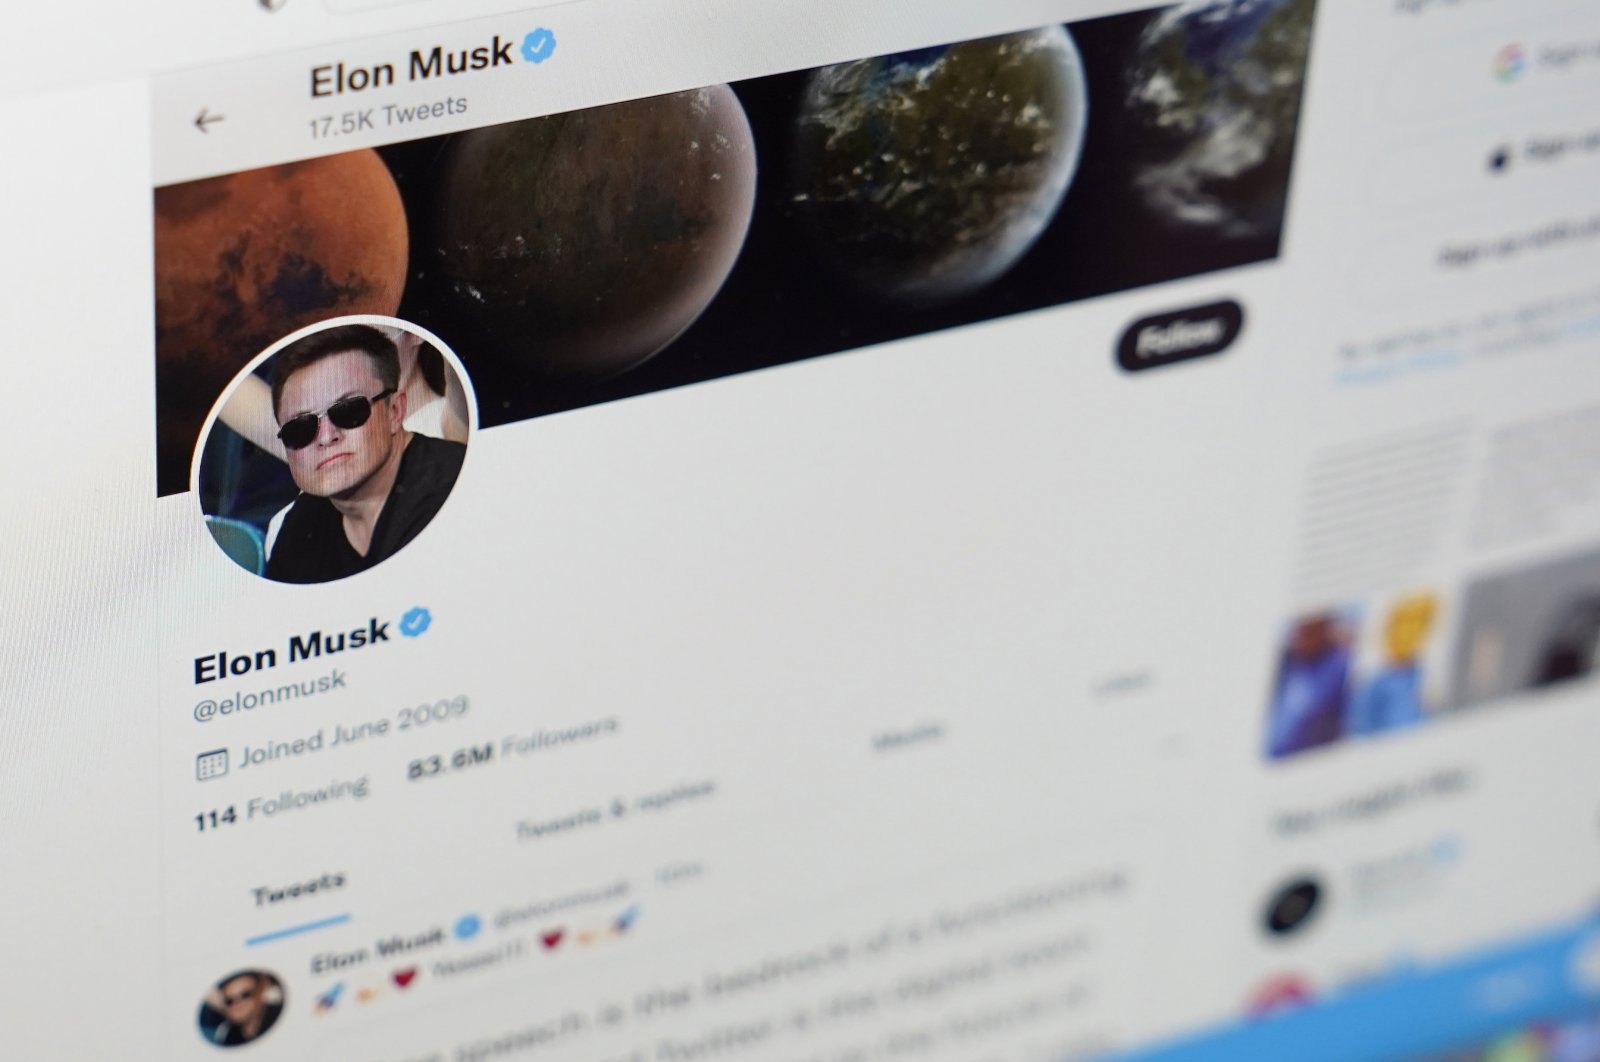 The Twitter page of Elon Musk is seen on the screen of a computer in Sausalito, California, U.S., April 25, 2022. (AP Photo)